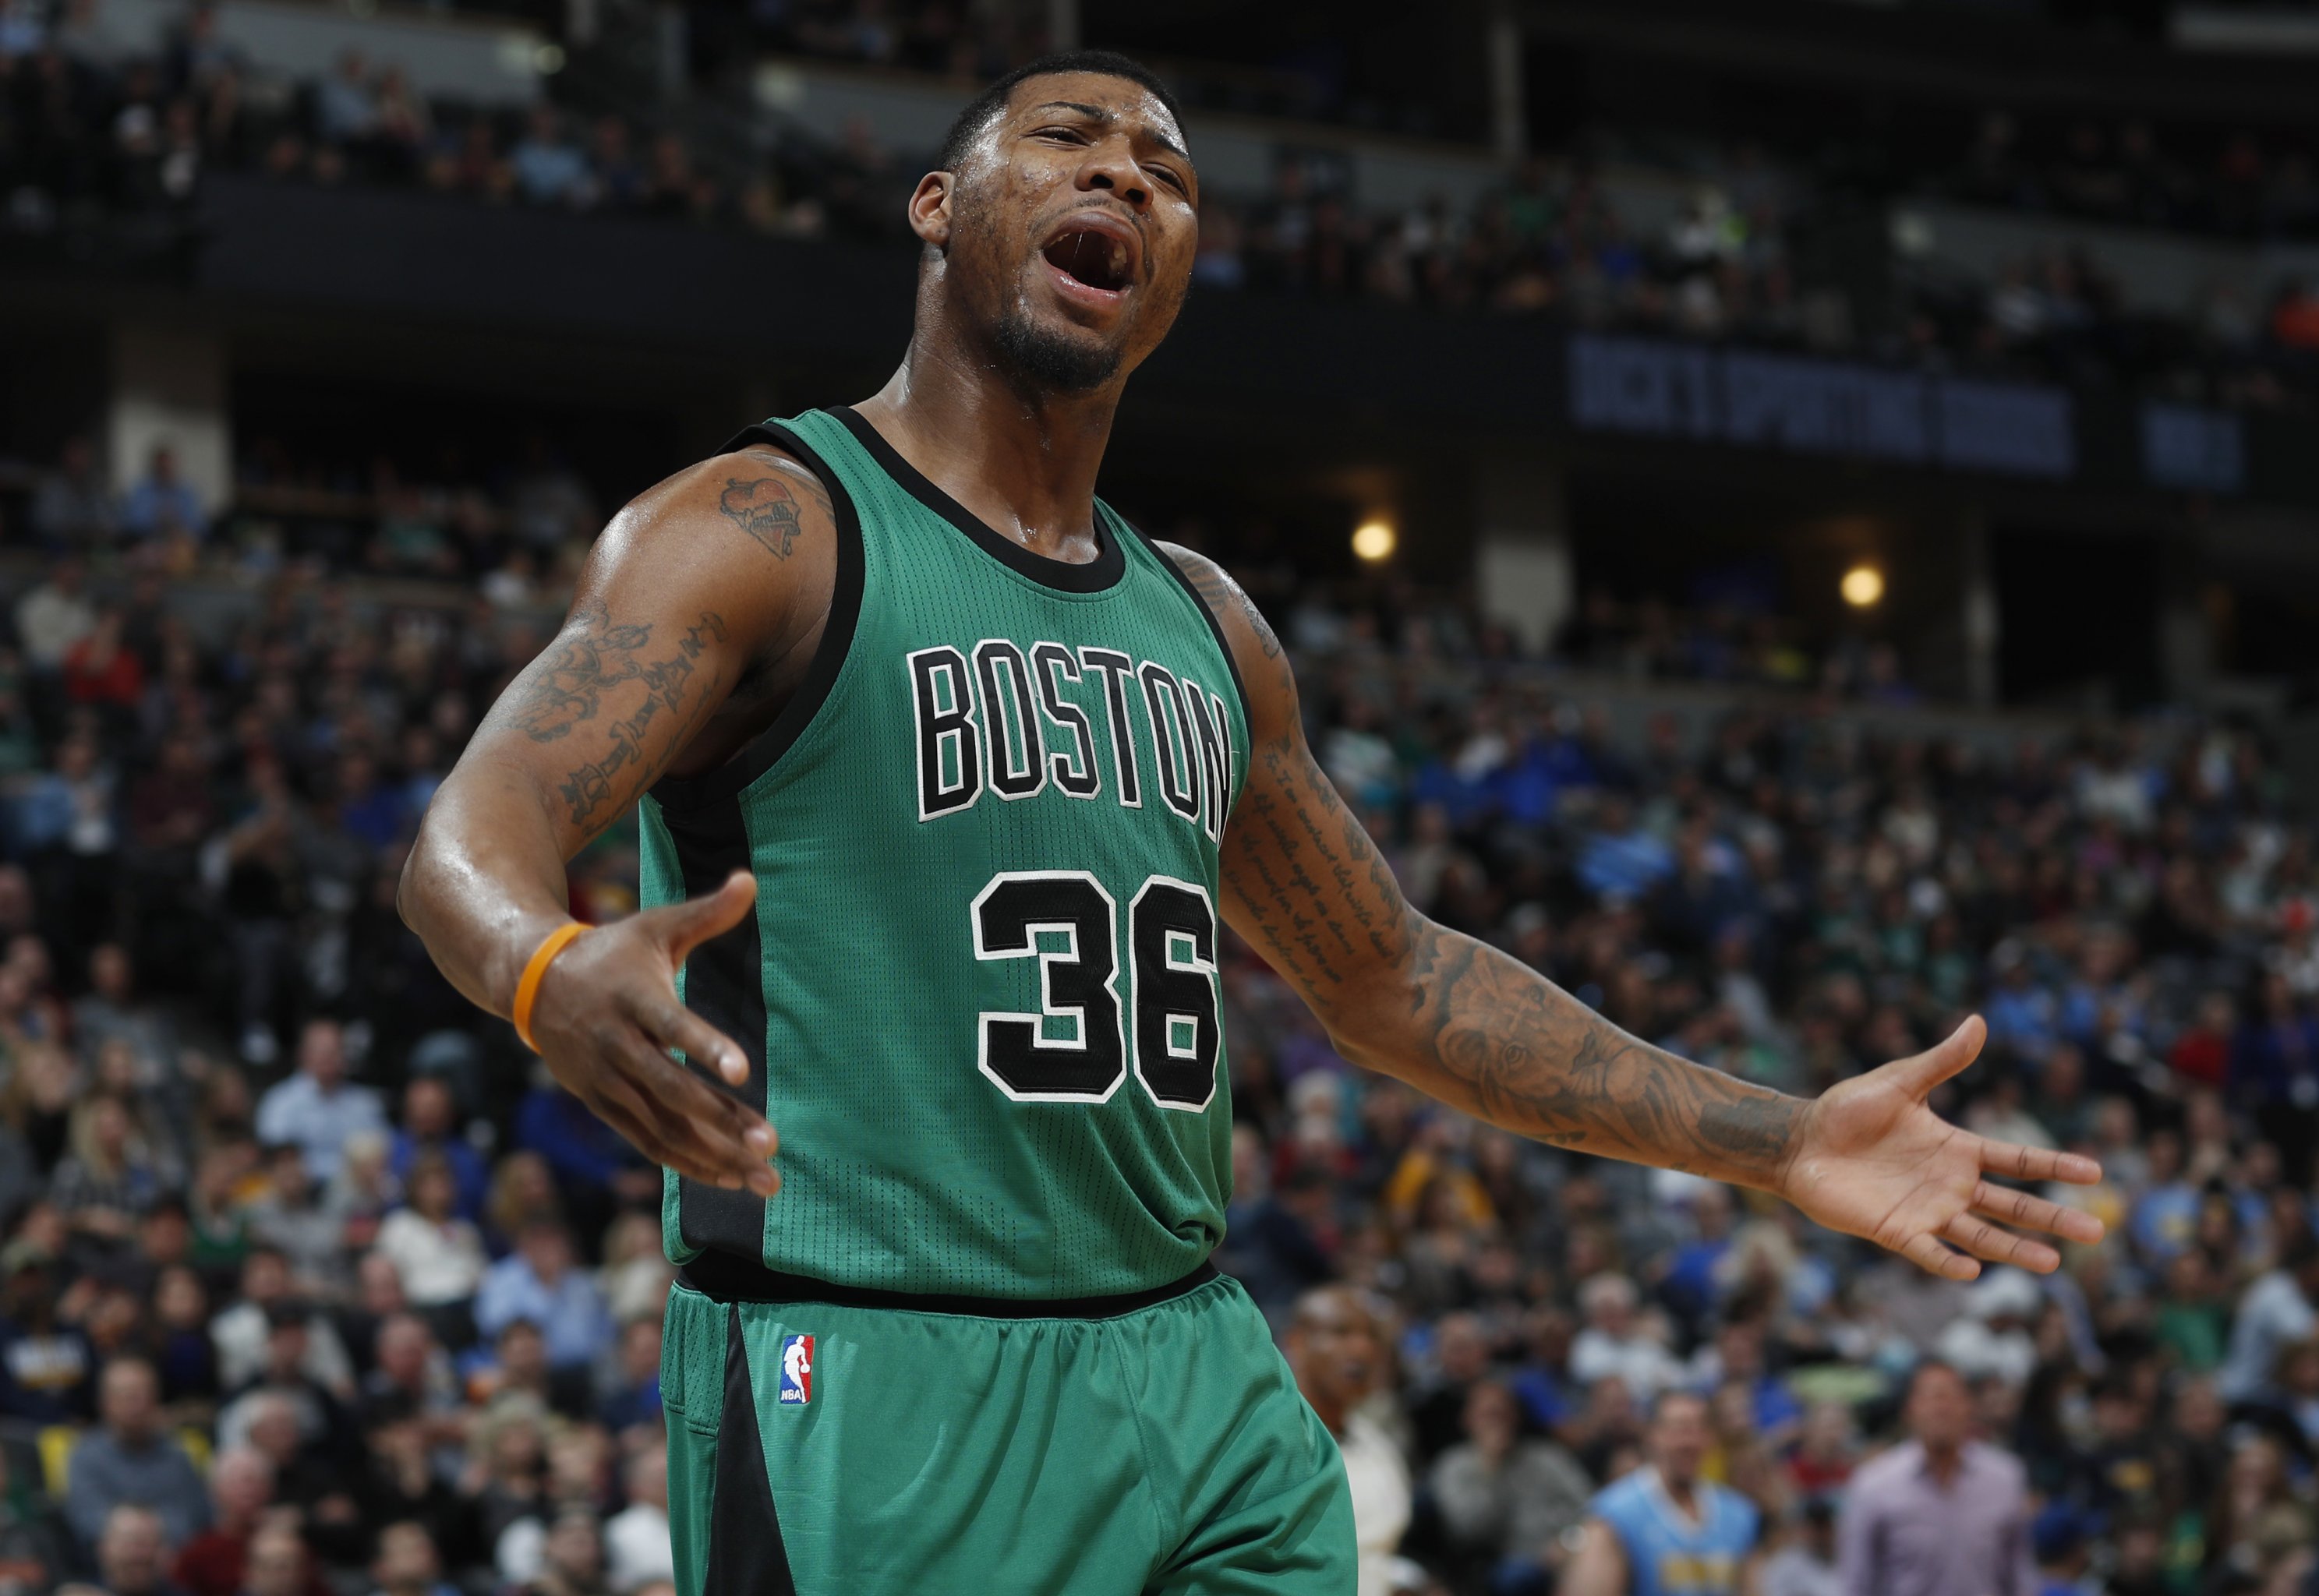 Marcus Smart: Know More About His Profile, Career Stats